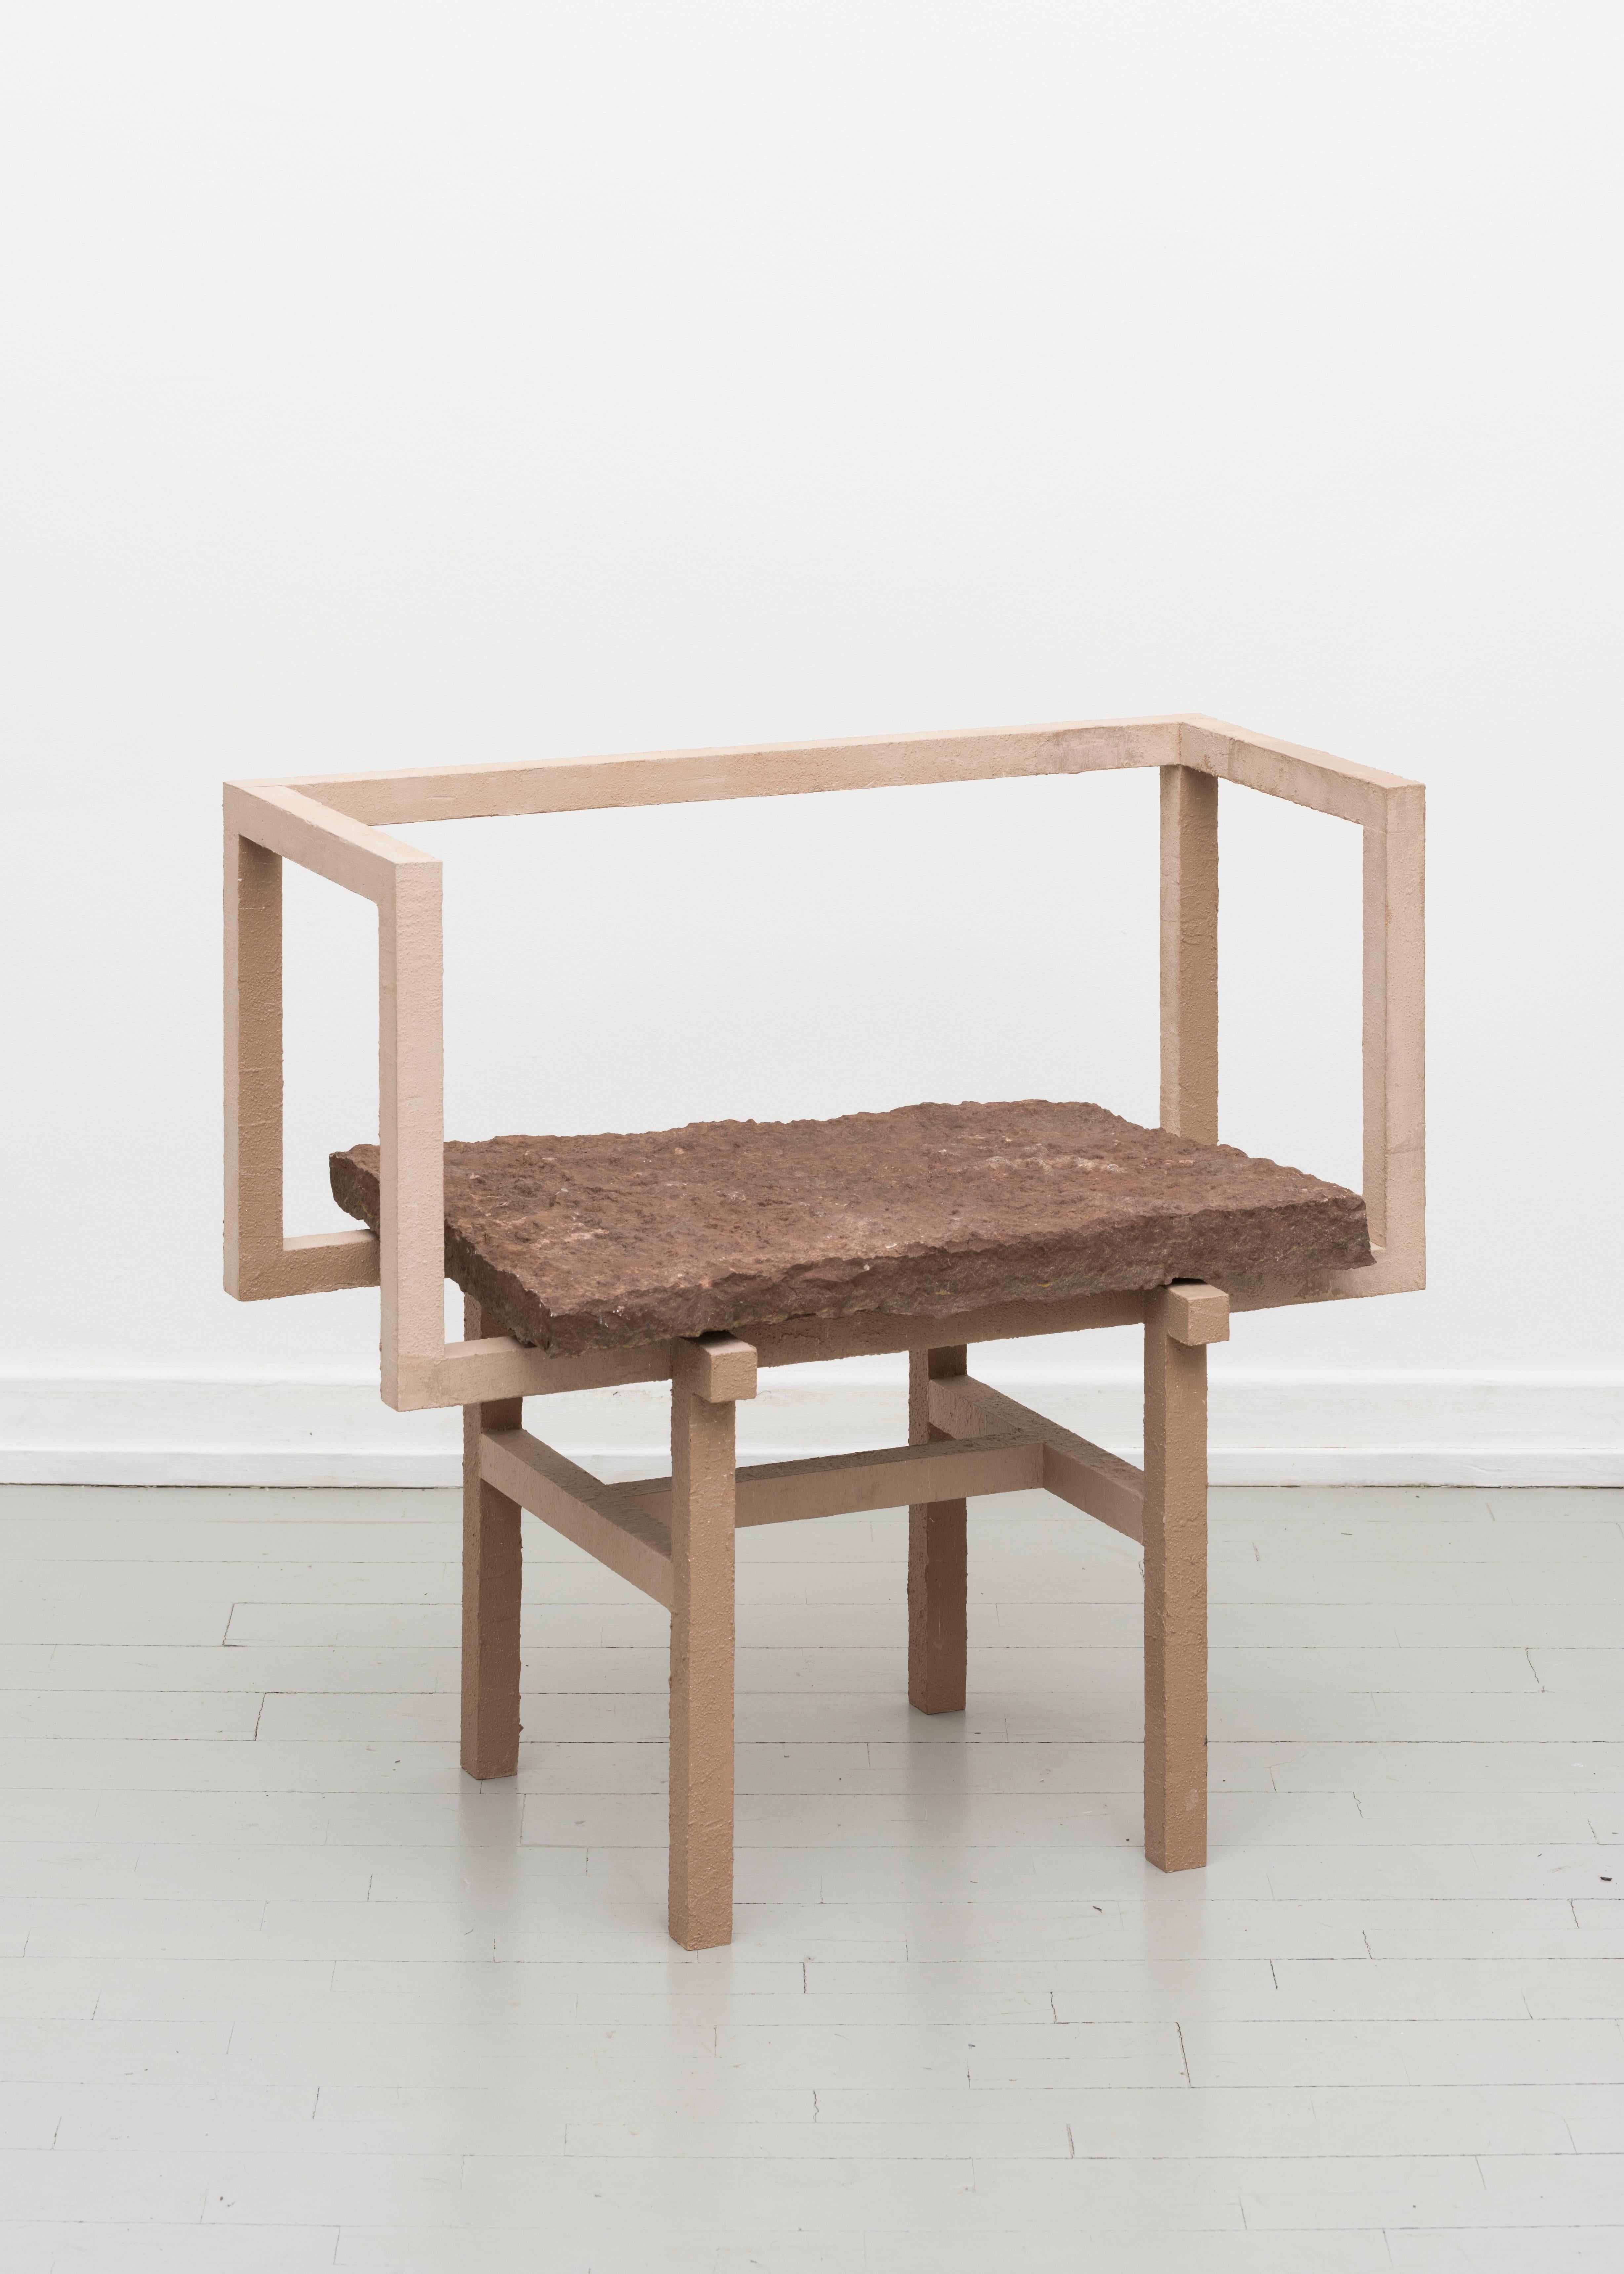 'Stoned Chair 1' was specifically designed for the exhibition Stoned at Etage Projects. A stone quarry in Öland, Sweden, is the departure point for the creation of the works. Paulsen has been exploring and examining the unique qualities of the rose